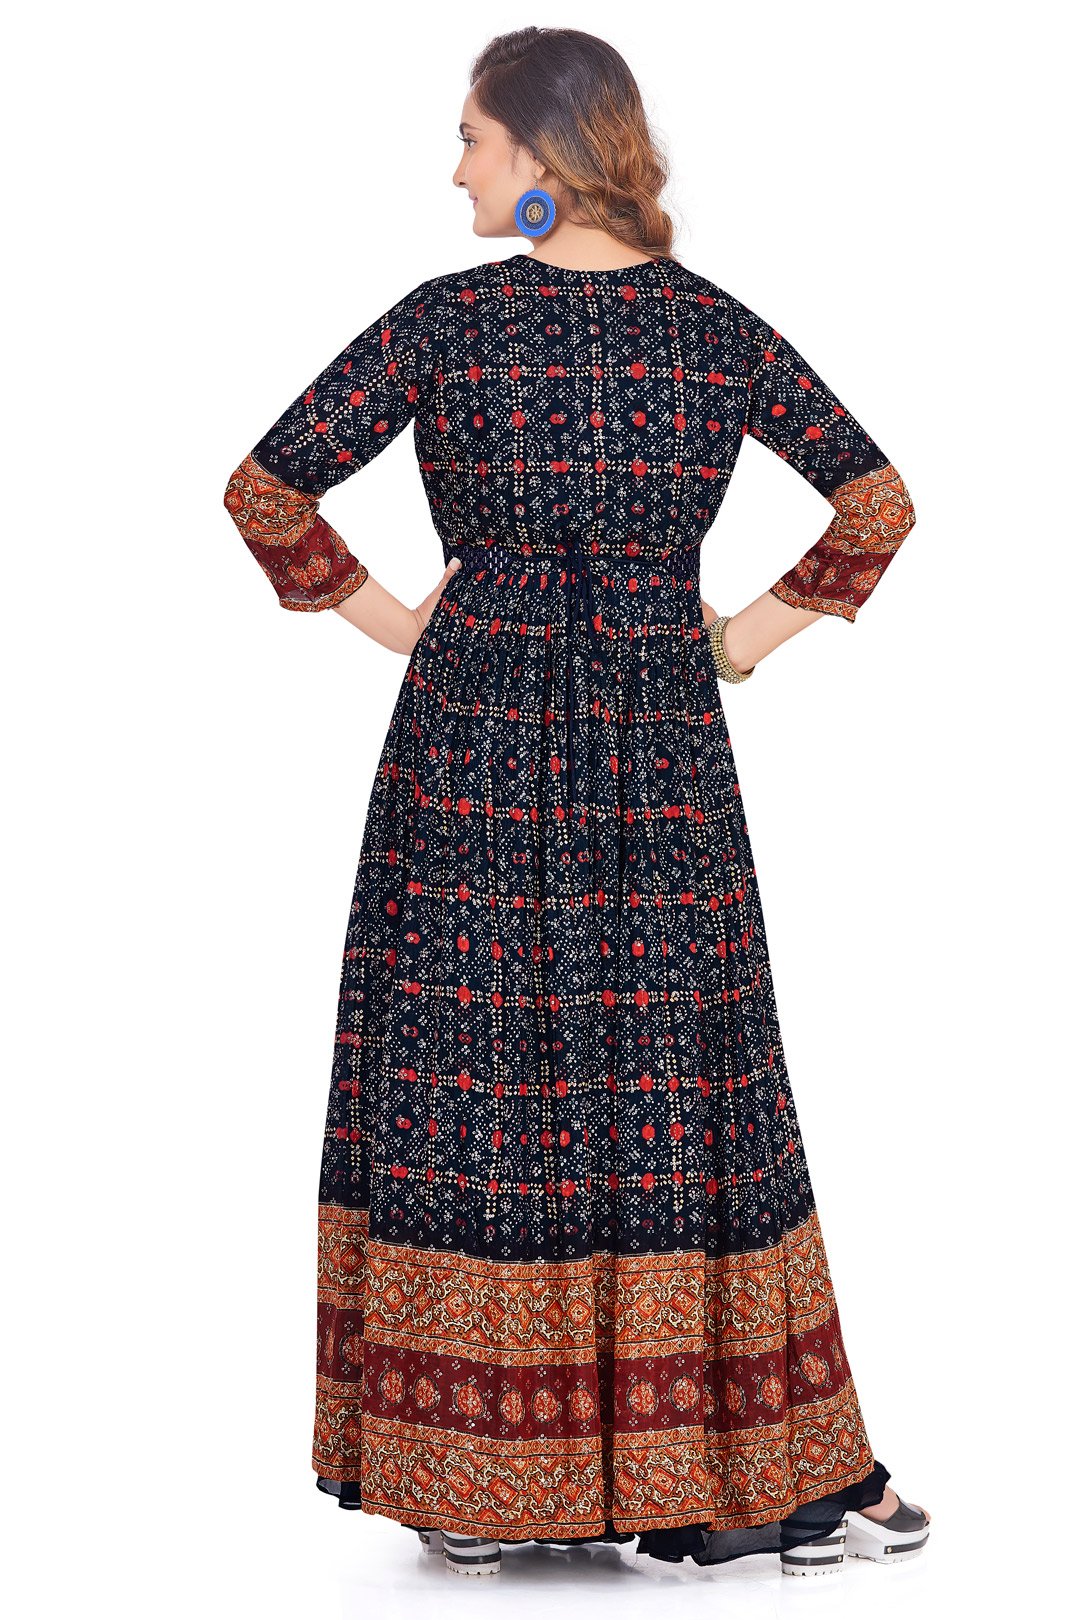 Party Wear Kurtis - 20 Latest Designs for Trending Look At Parties | Kurti  designs, Party wear indian dresses, Indian dresses